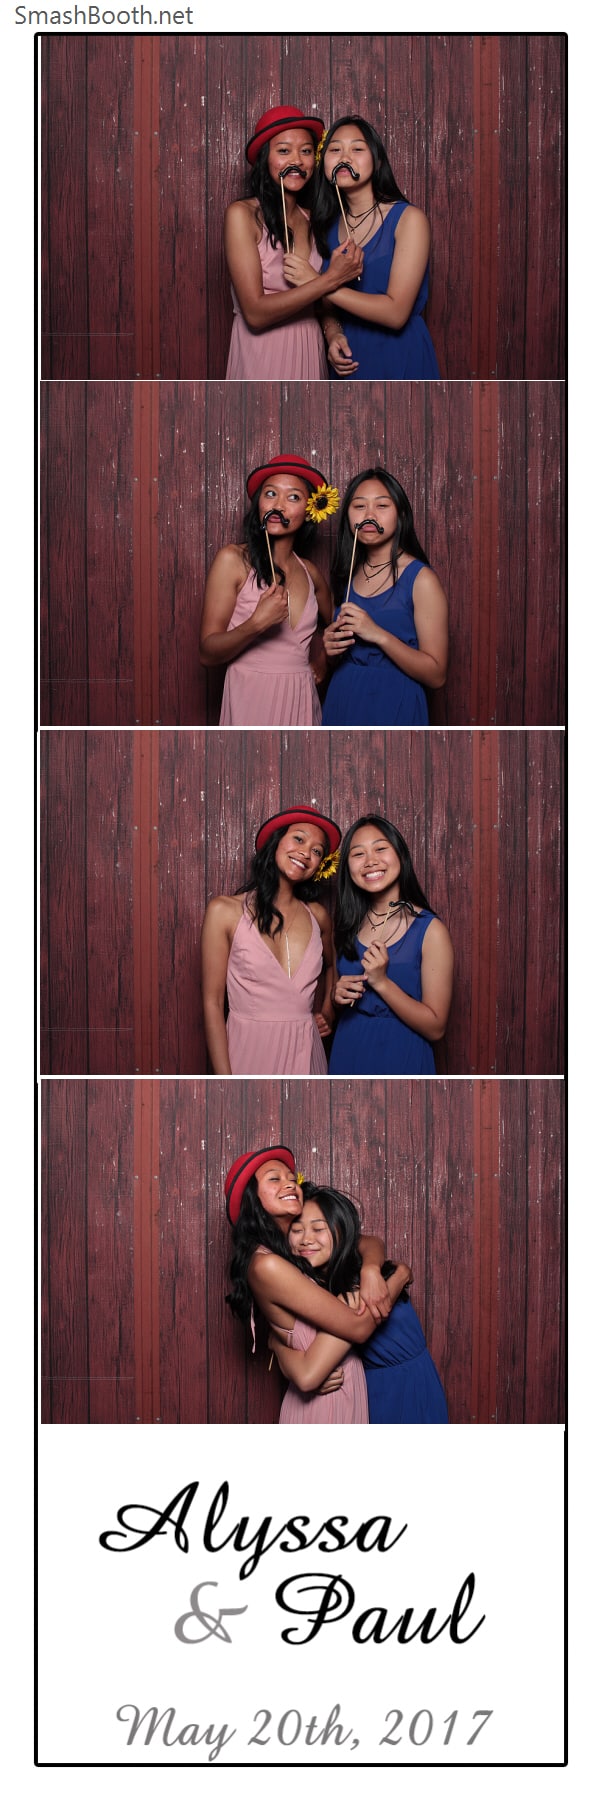 2x6 photo strip of two girls posing in front of wood fence backdrop